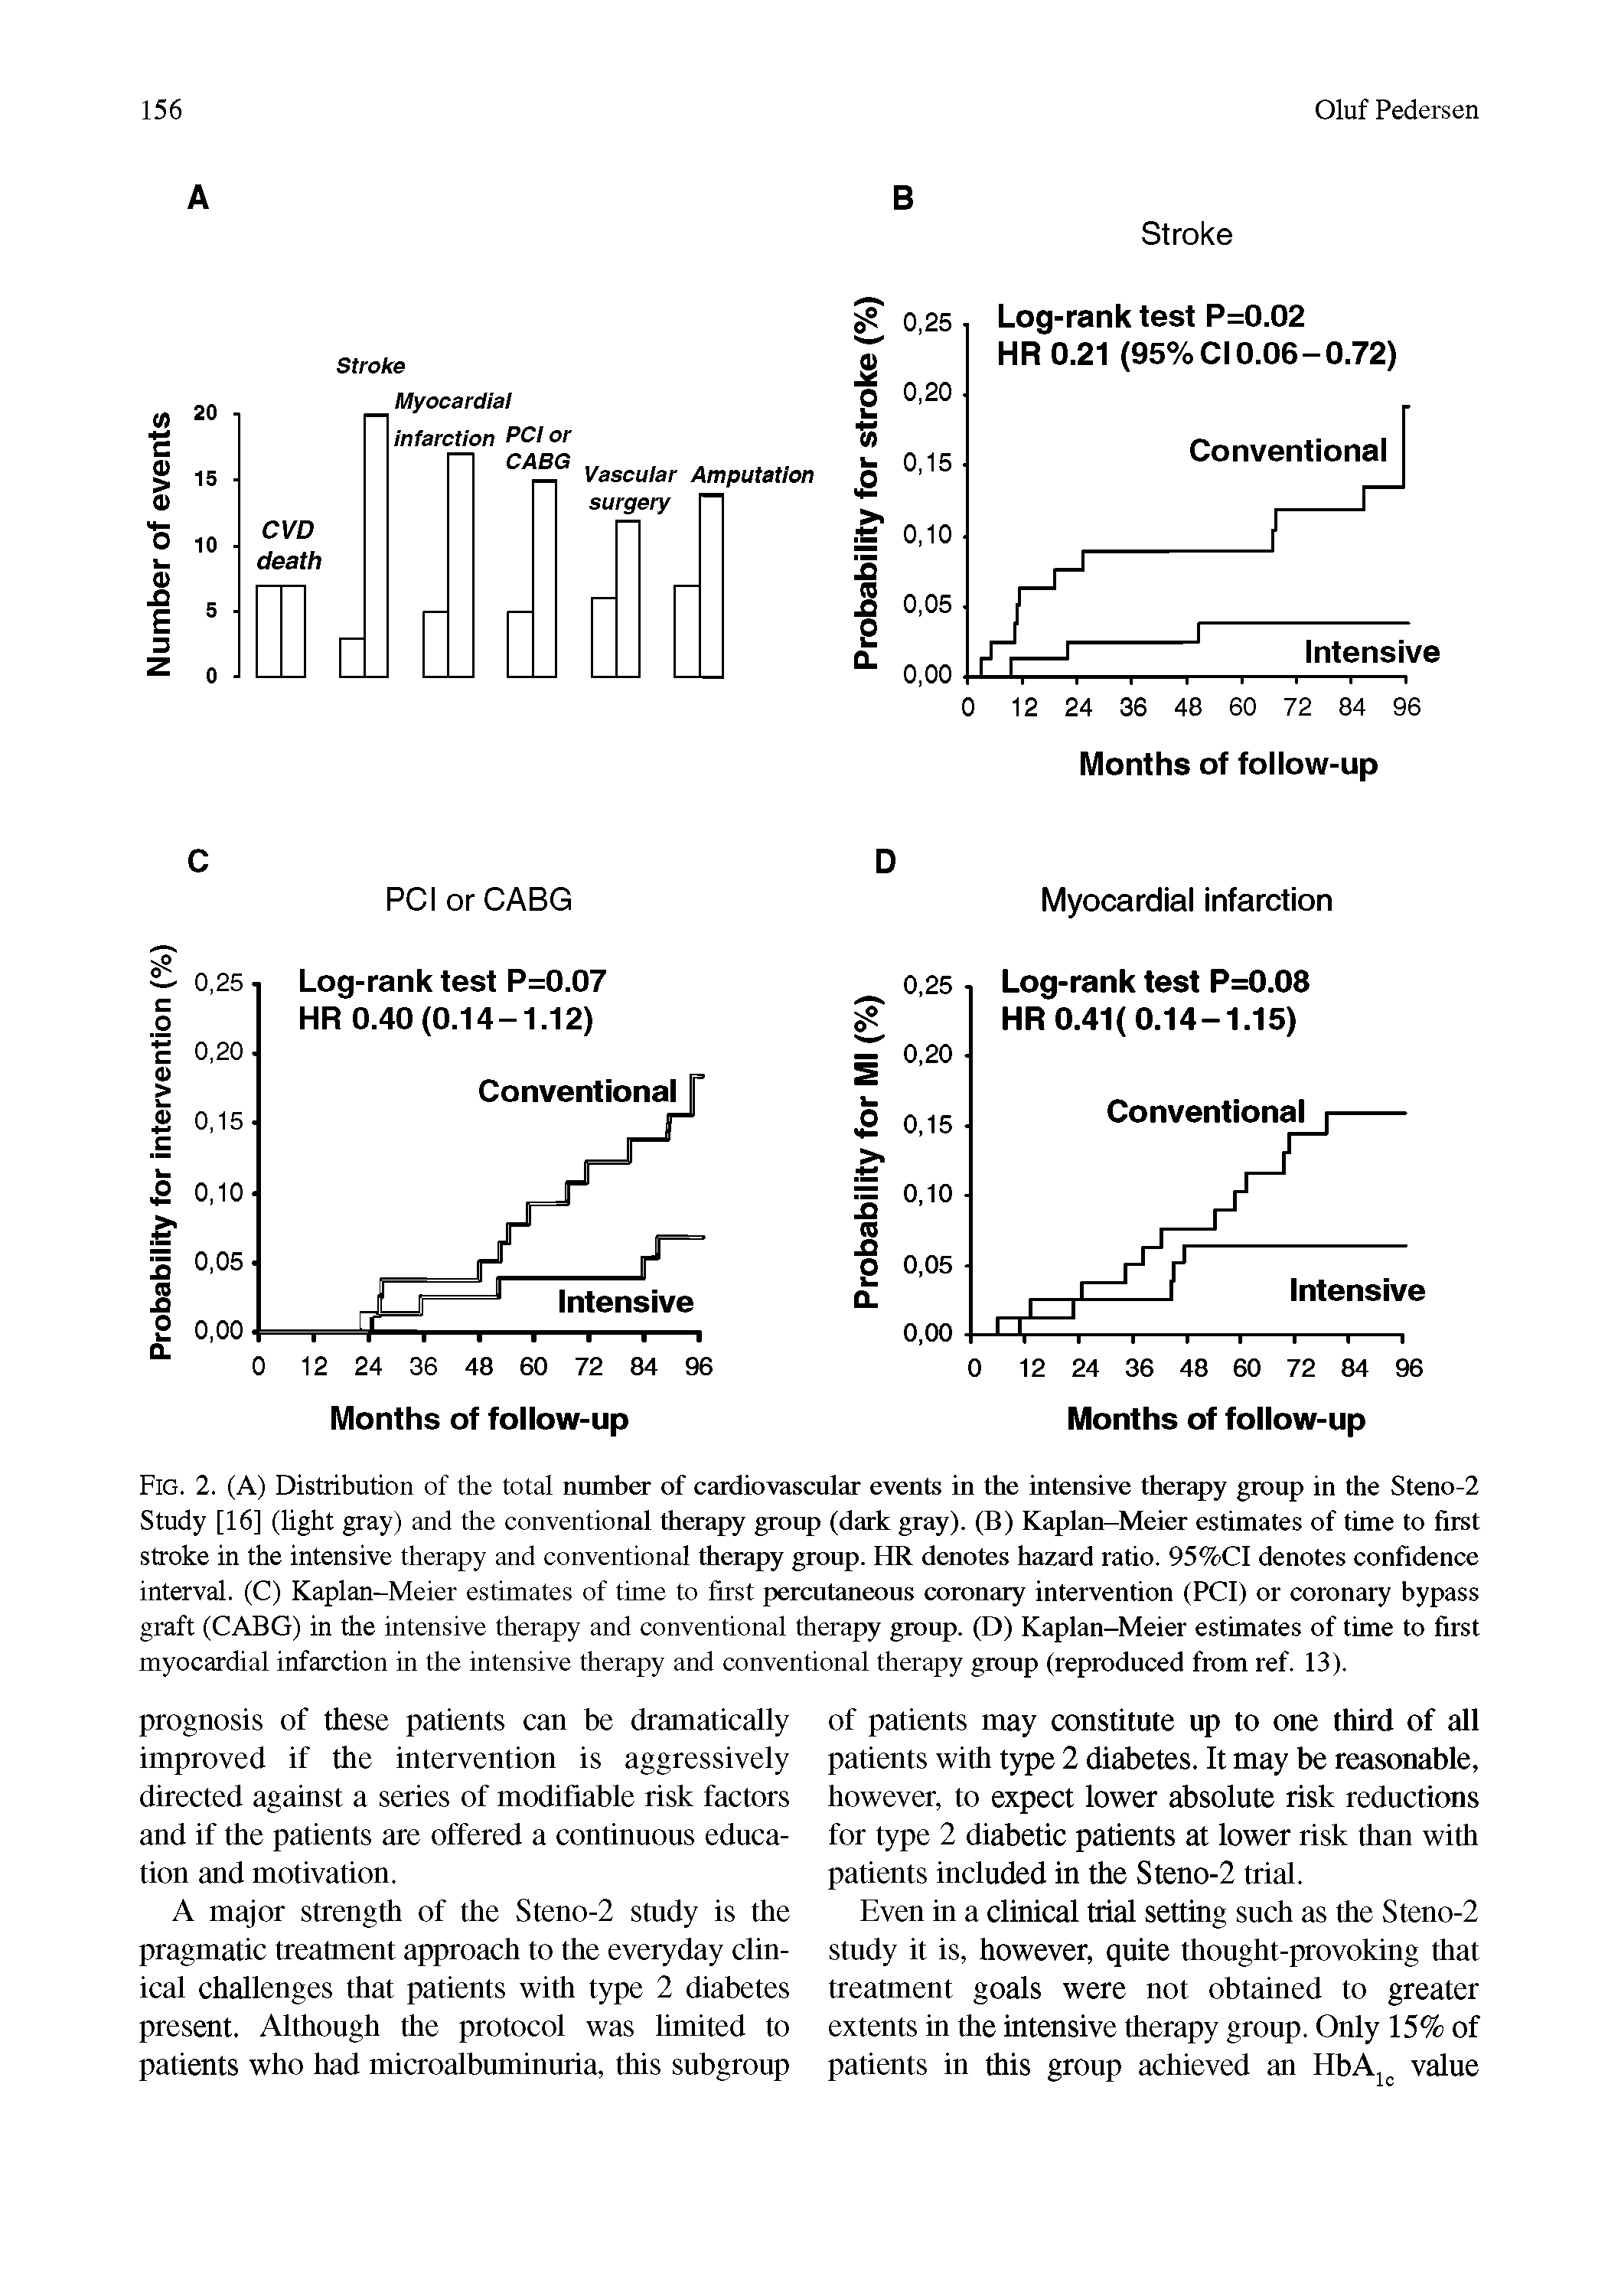 Fig. 2. (A) Distribution of the total number of cardiovascular events in the intensive therapy group in the Steno-2 Study [16] (light gray) and the conventional therapy group (dark gray). (B) Kaplan-Meier estimates of time to first stroke in the intensive therapy and conventional therapy group. HR denotes hazard ratio. 95%C1 denotes confidence interval. (C) Kaplan-Meier estimates of time to first percutaneous coronary intervention (PCI) or coronary bypass graft (CABG) in the intensive therapy and conventional therapy group. (D) Kaplan-Meier estimates of time to first myocardial infarction in the intensive therapy and conventional therapy group (reproduced from ref. 13).